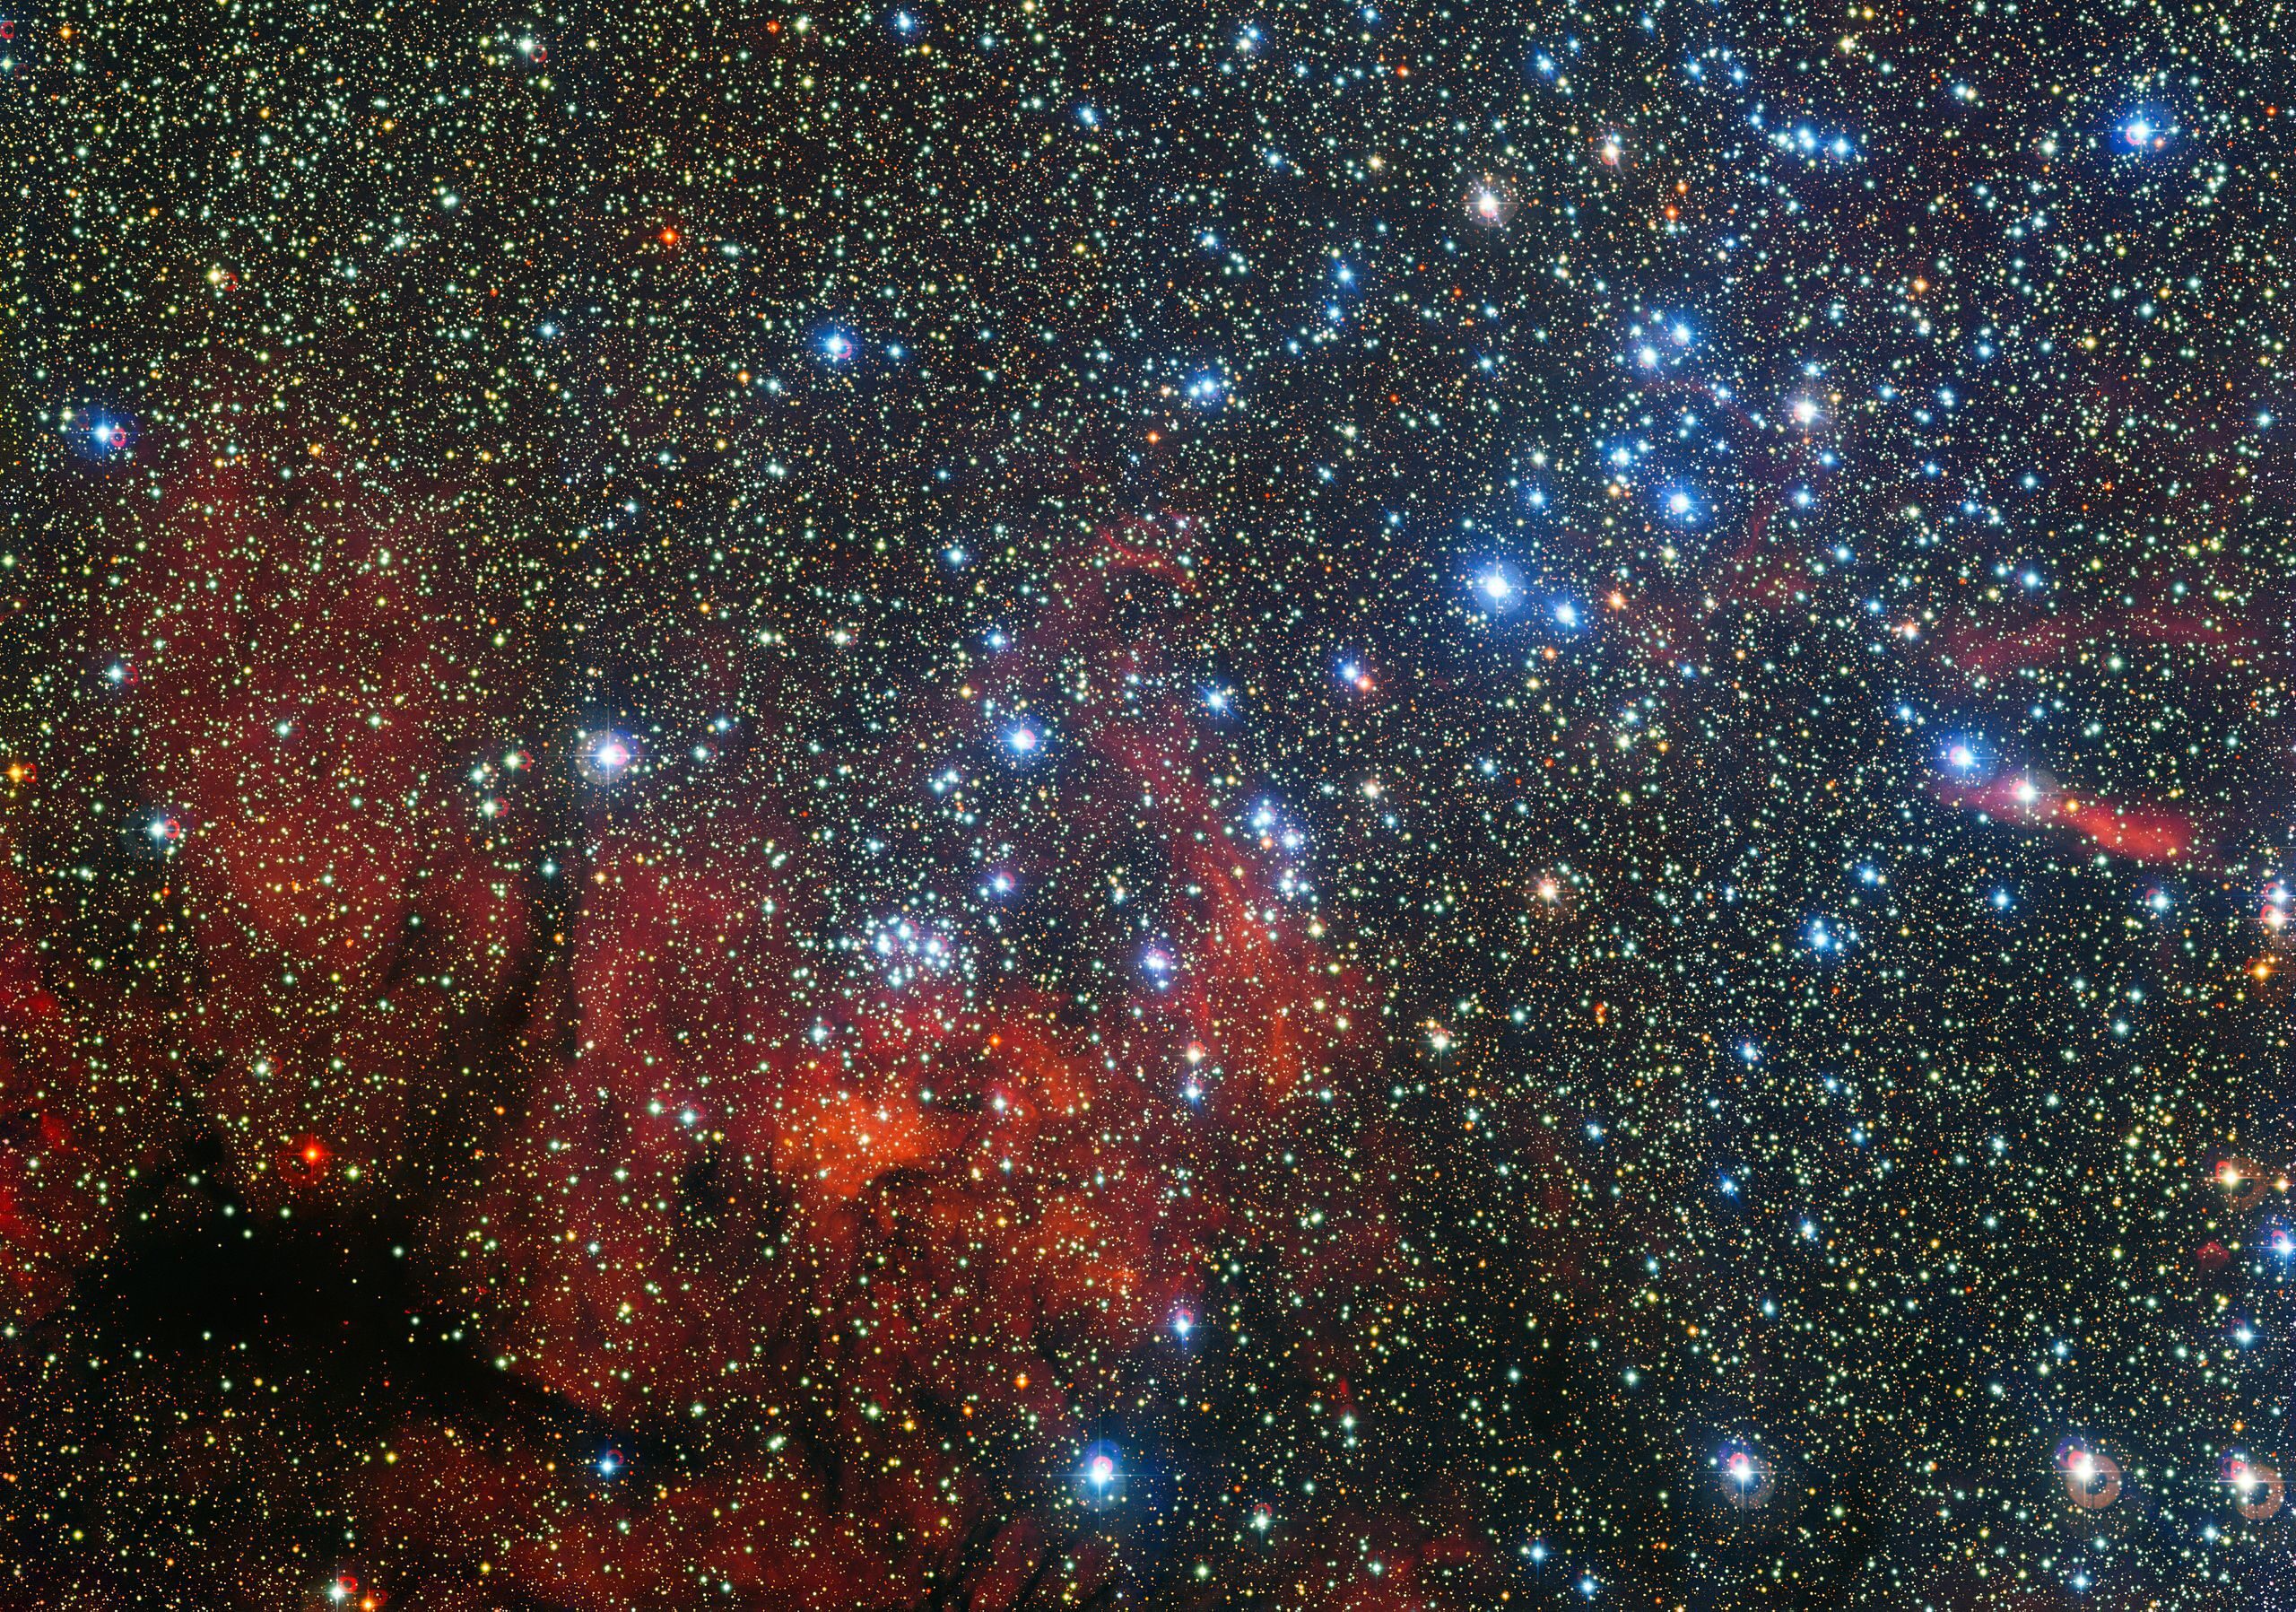 Open cluster NGC 3590, located 7,500 light-years away in the constellation Carina.